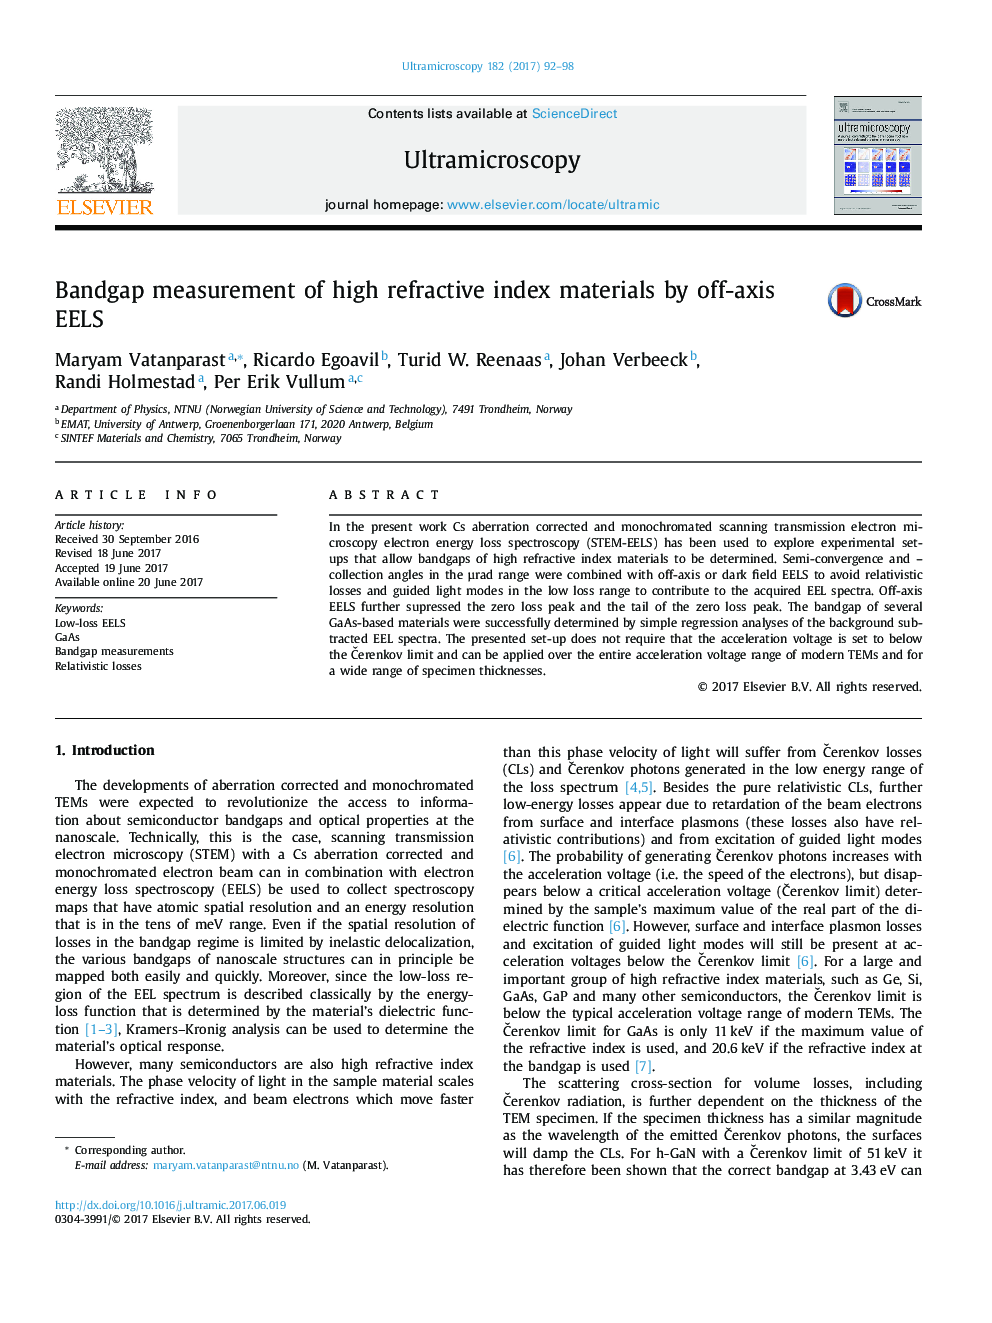 Bandgap measurement of high refractive index materials by off-axis EELS